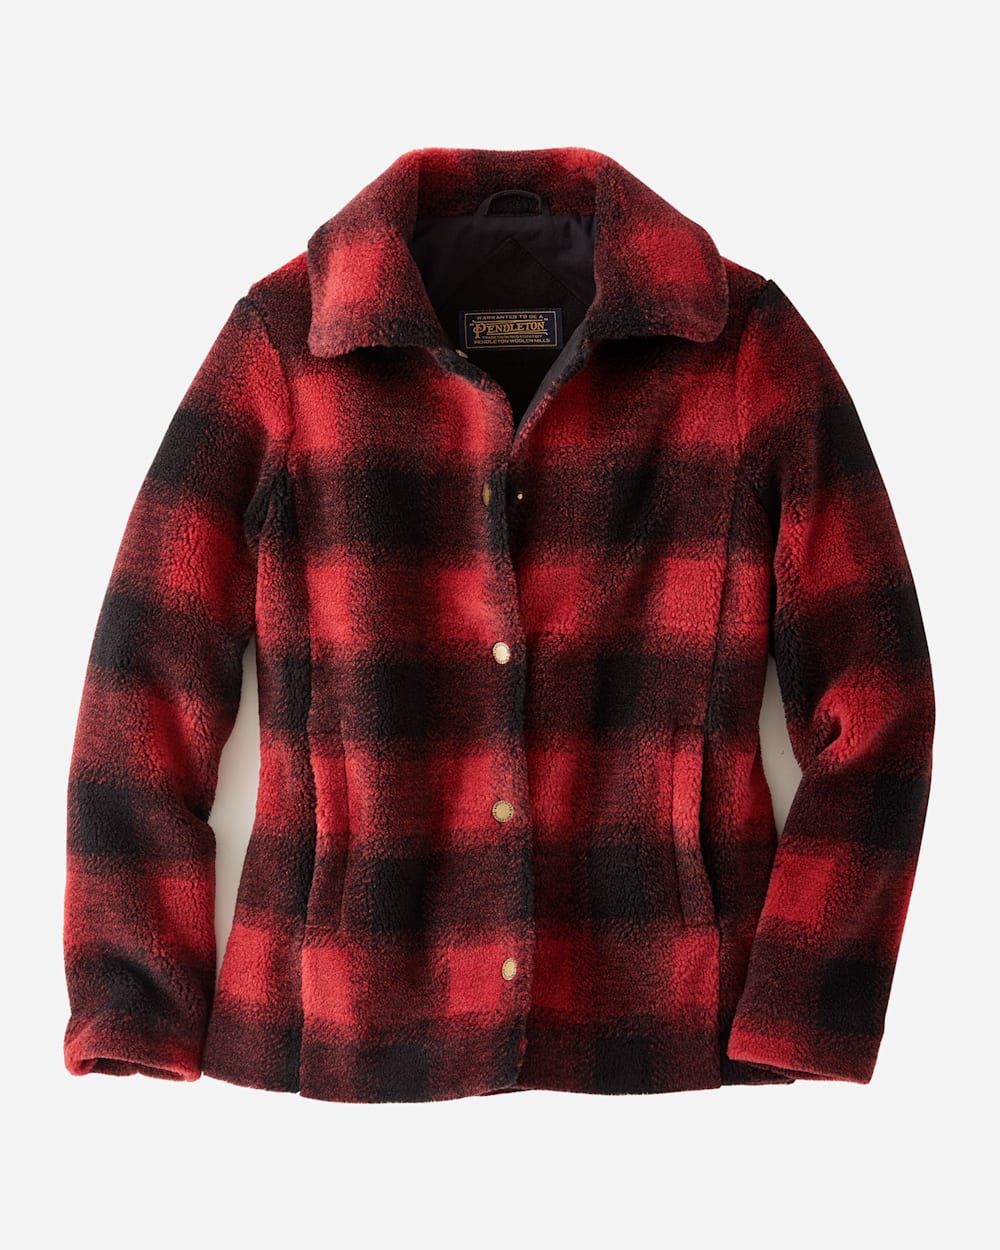 WOMEN'S DANVILLE CHECK SHERPA JACKET IN RED/BLACK BUFFALO CHECK image number 1